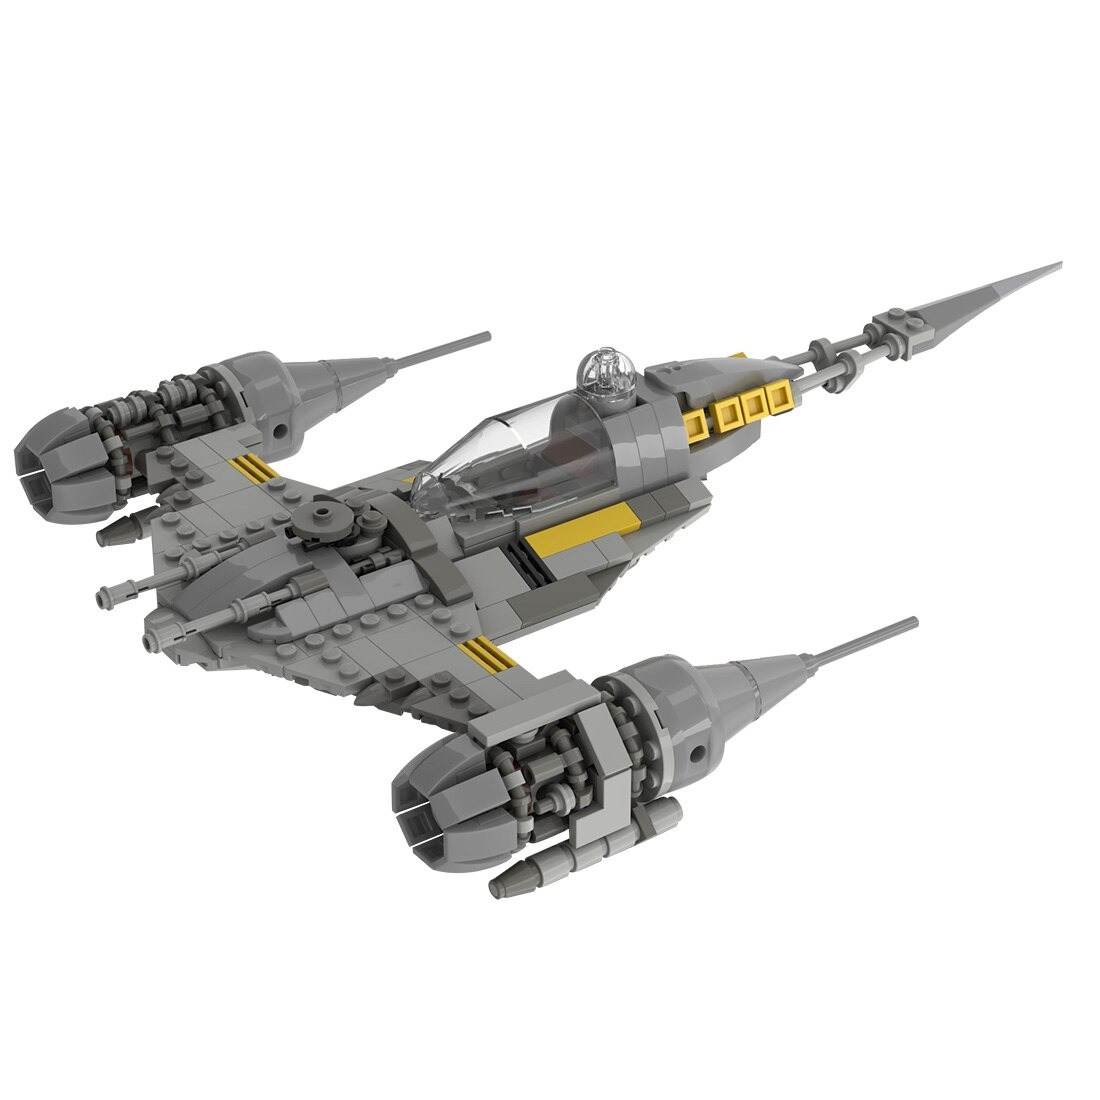 authorized moc 100546 n 1 starfighter bui main 0 1 - MOULD KING